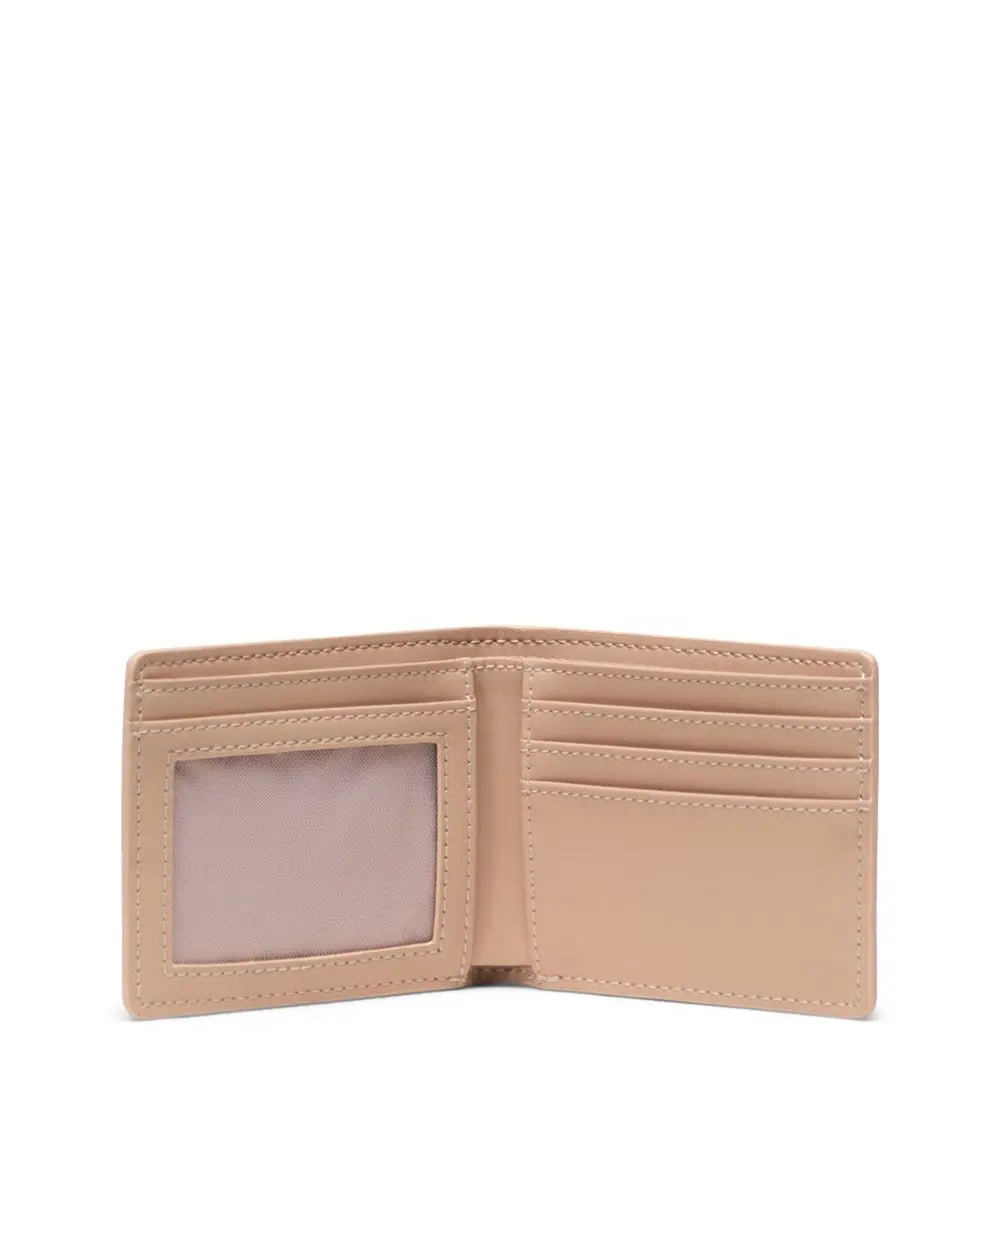 Hank Wallet Leather Natural